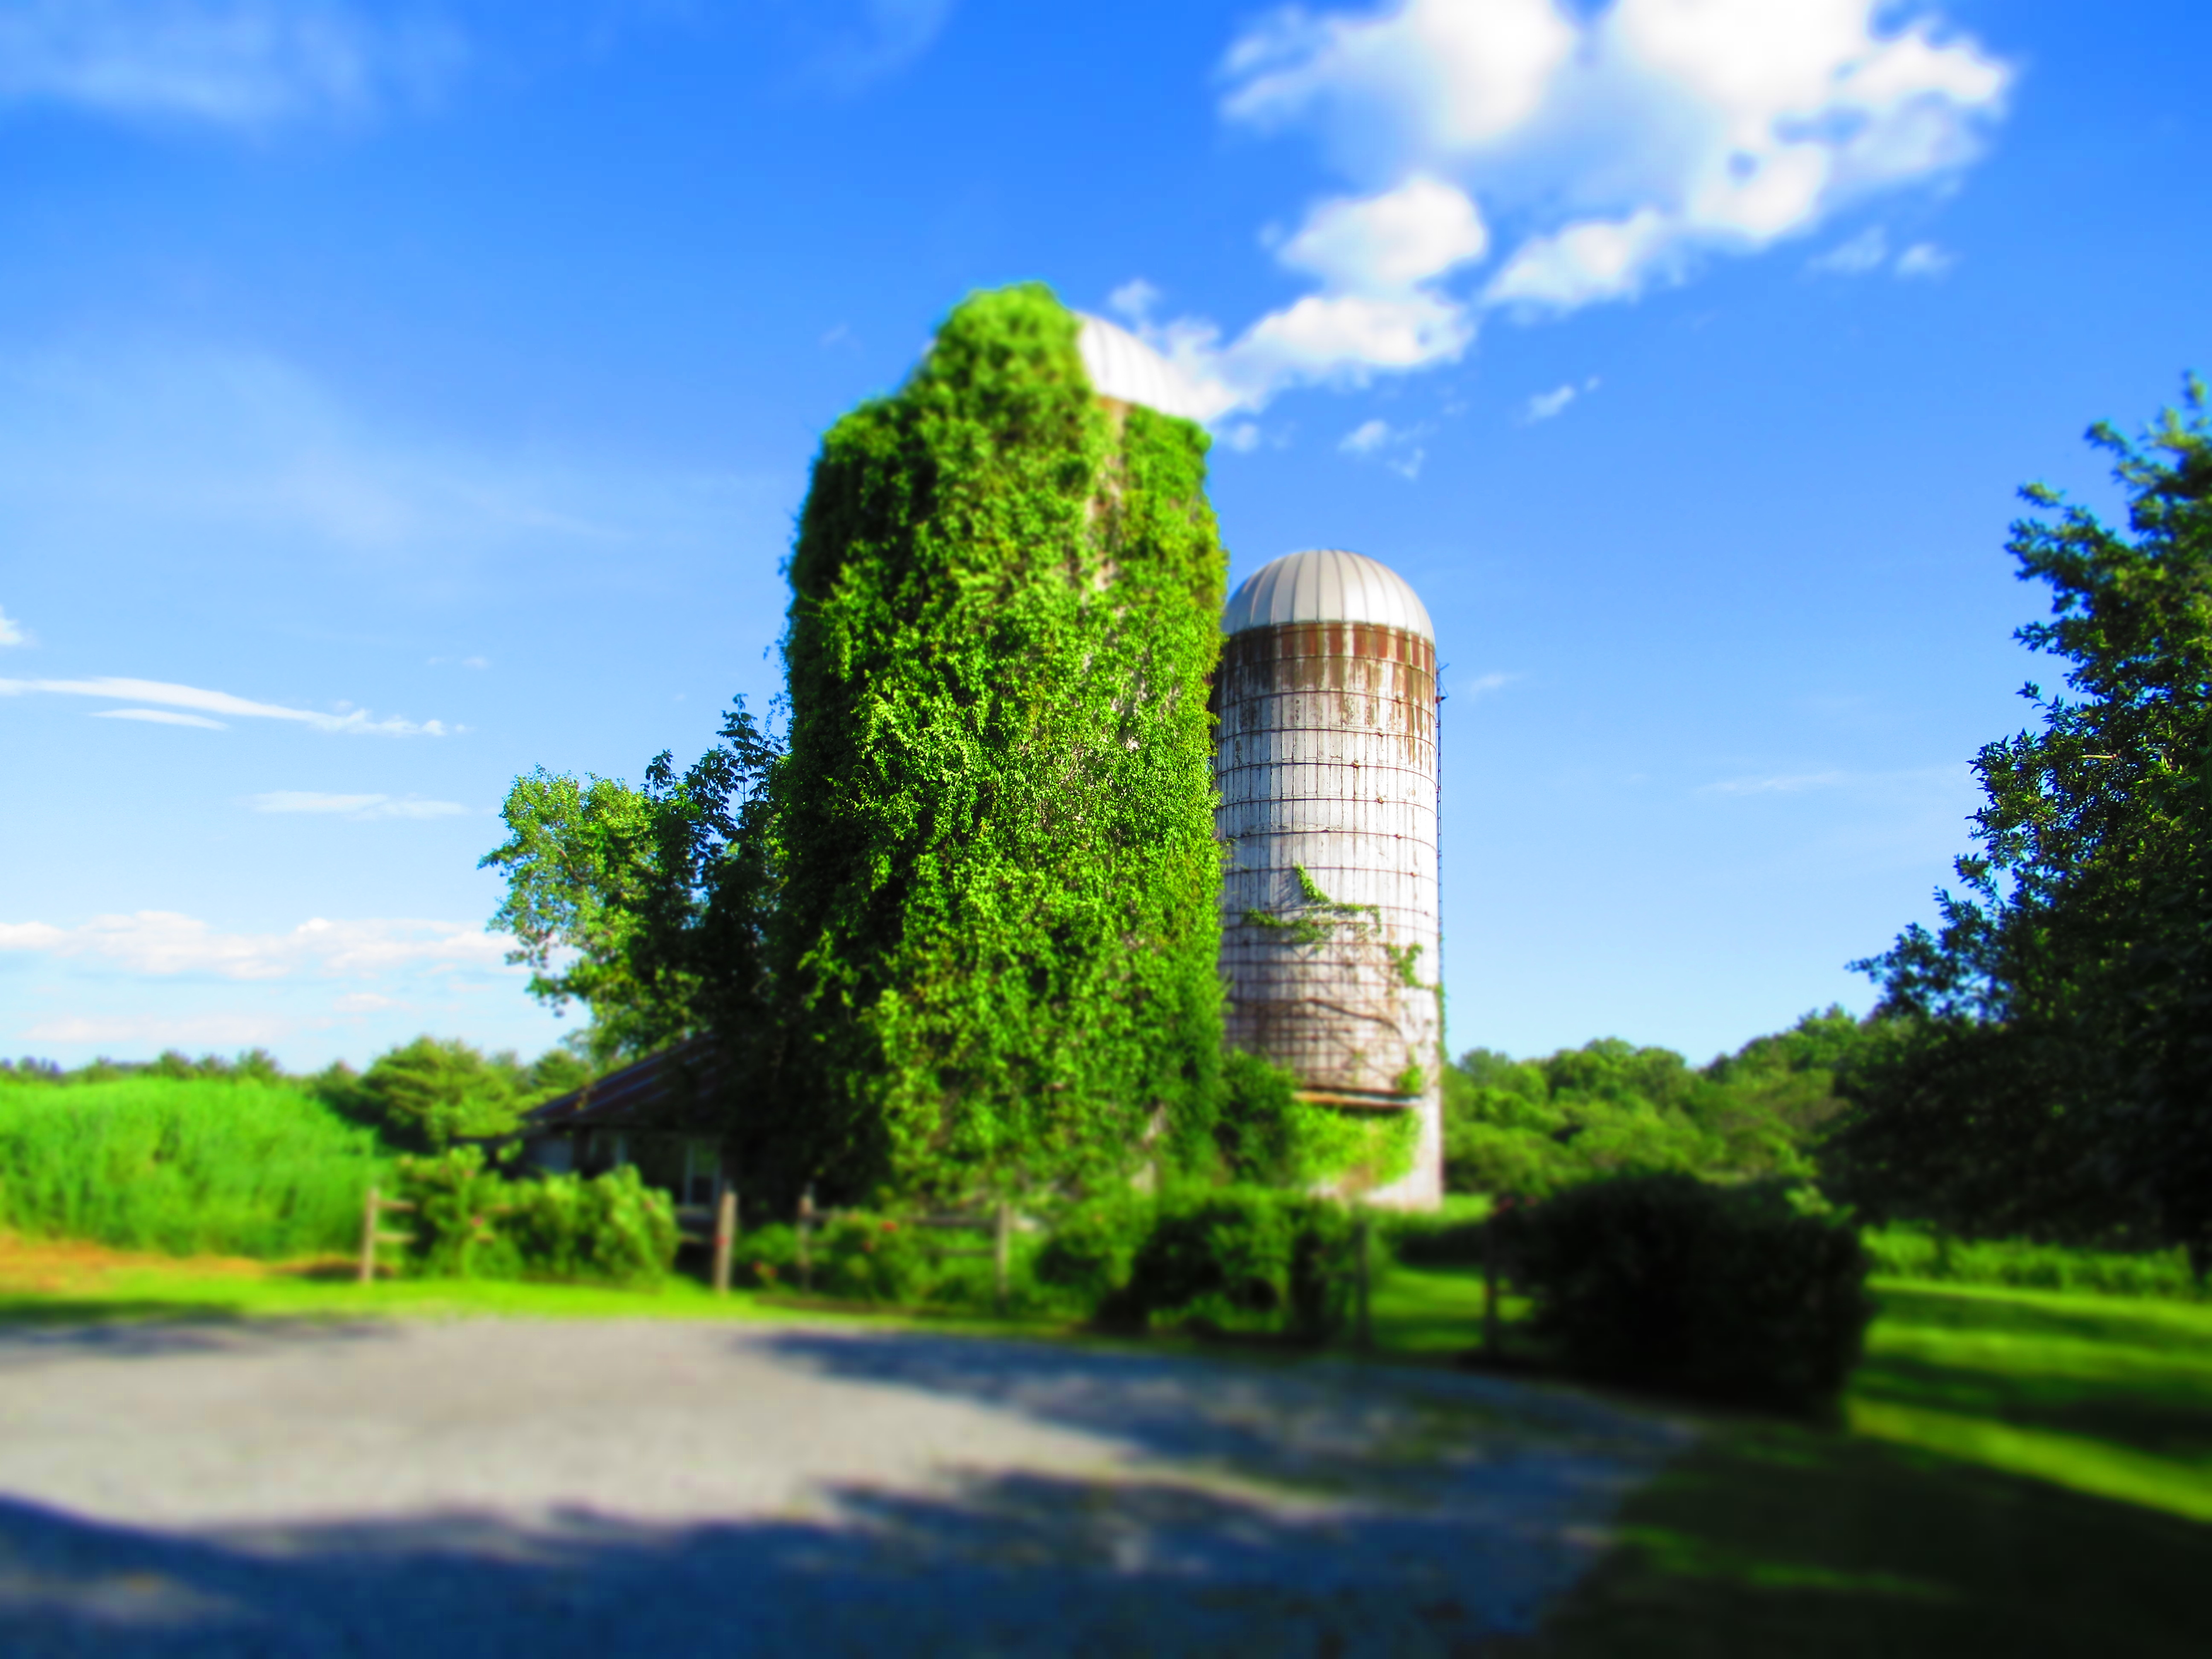 The two silos covered in bright green vines, this image also shows the parking area for guests | Near Lake George | Adirondacks | Saratoga Farmstead B&B